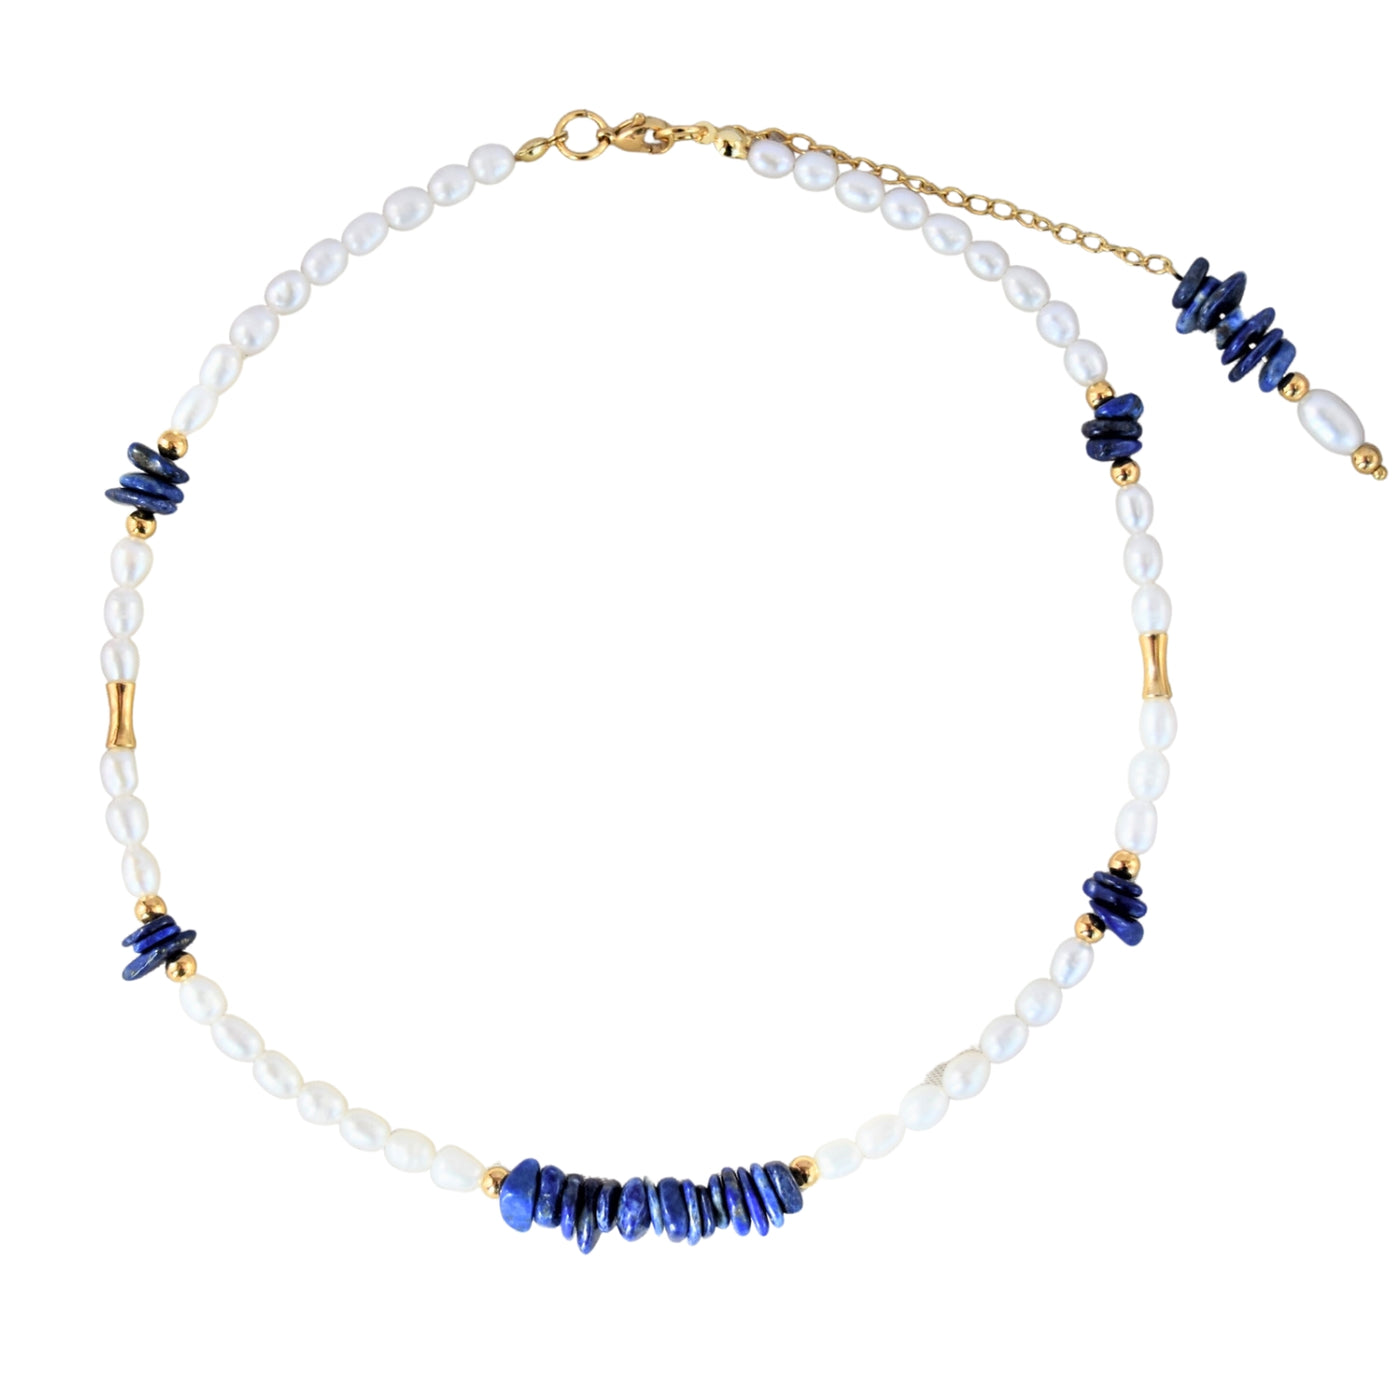 Necklace with freshwater pearls and lapis lazuli